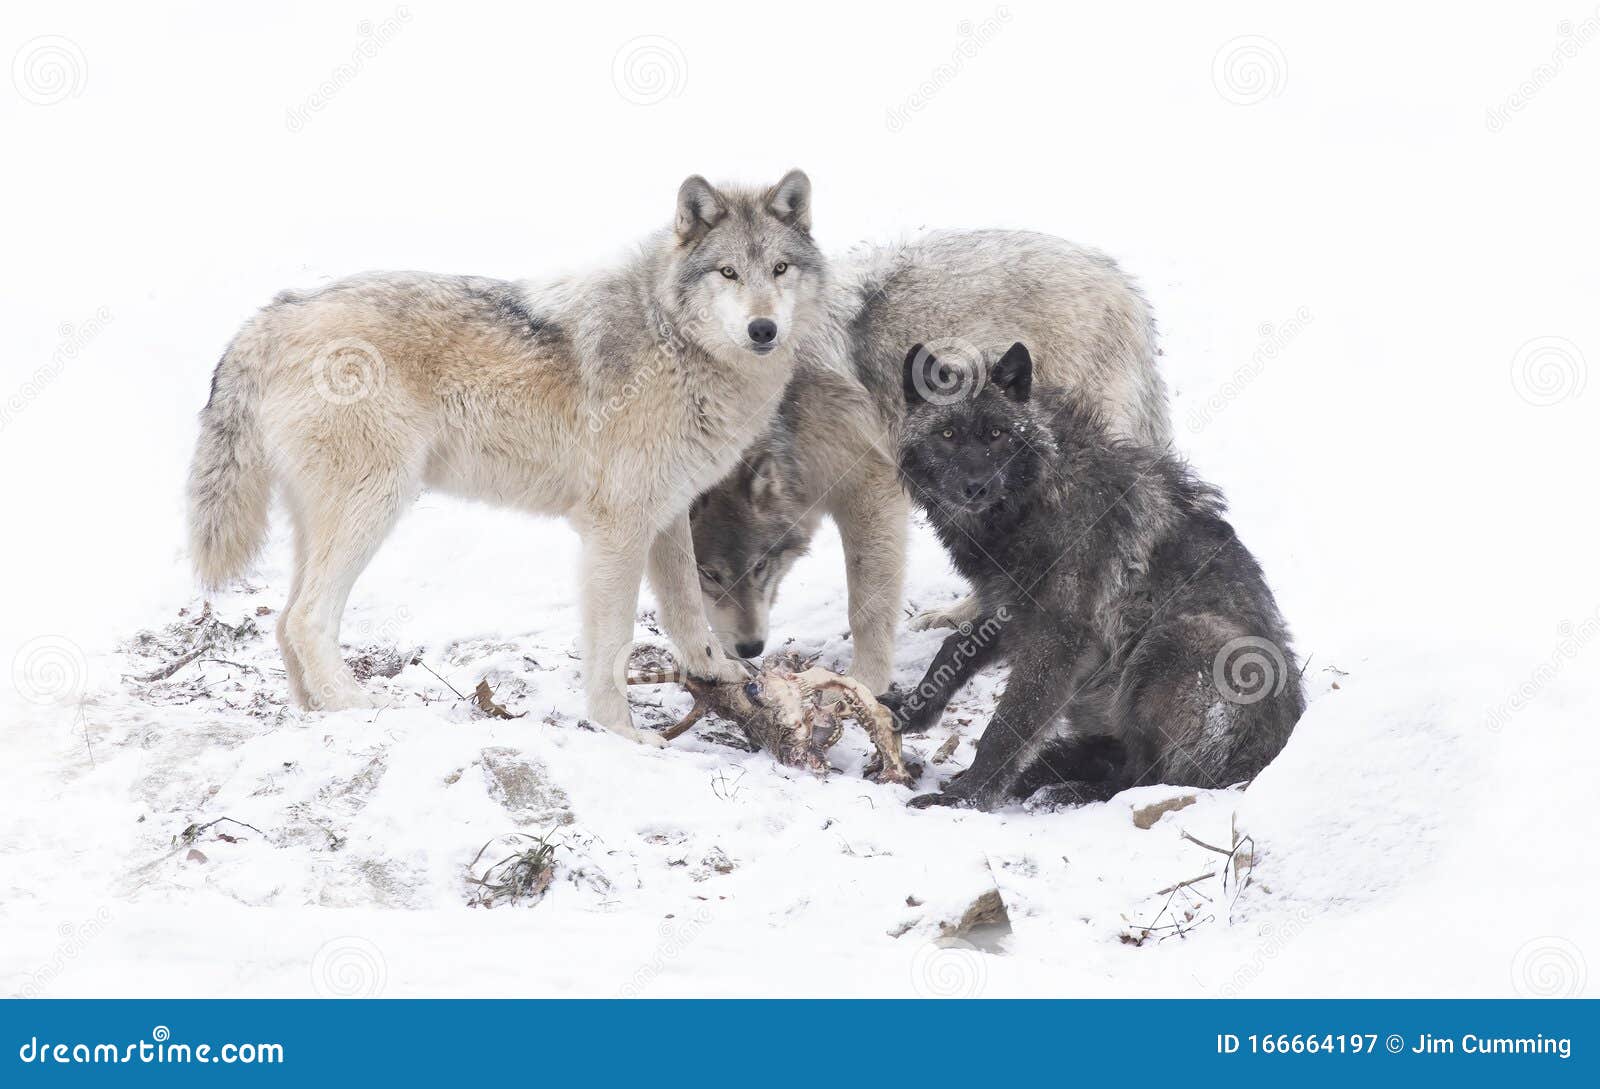 Three Black wolves isolated on white background eating dinner in the winter snow in Canada